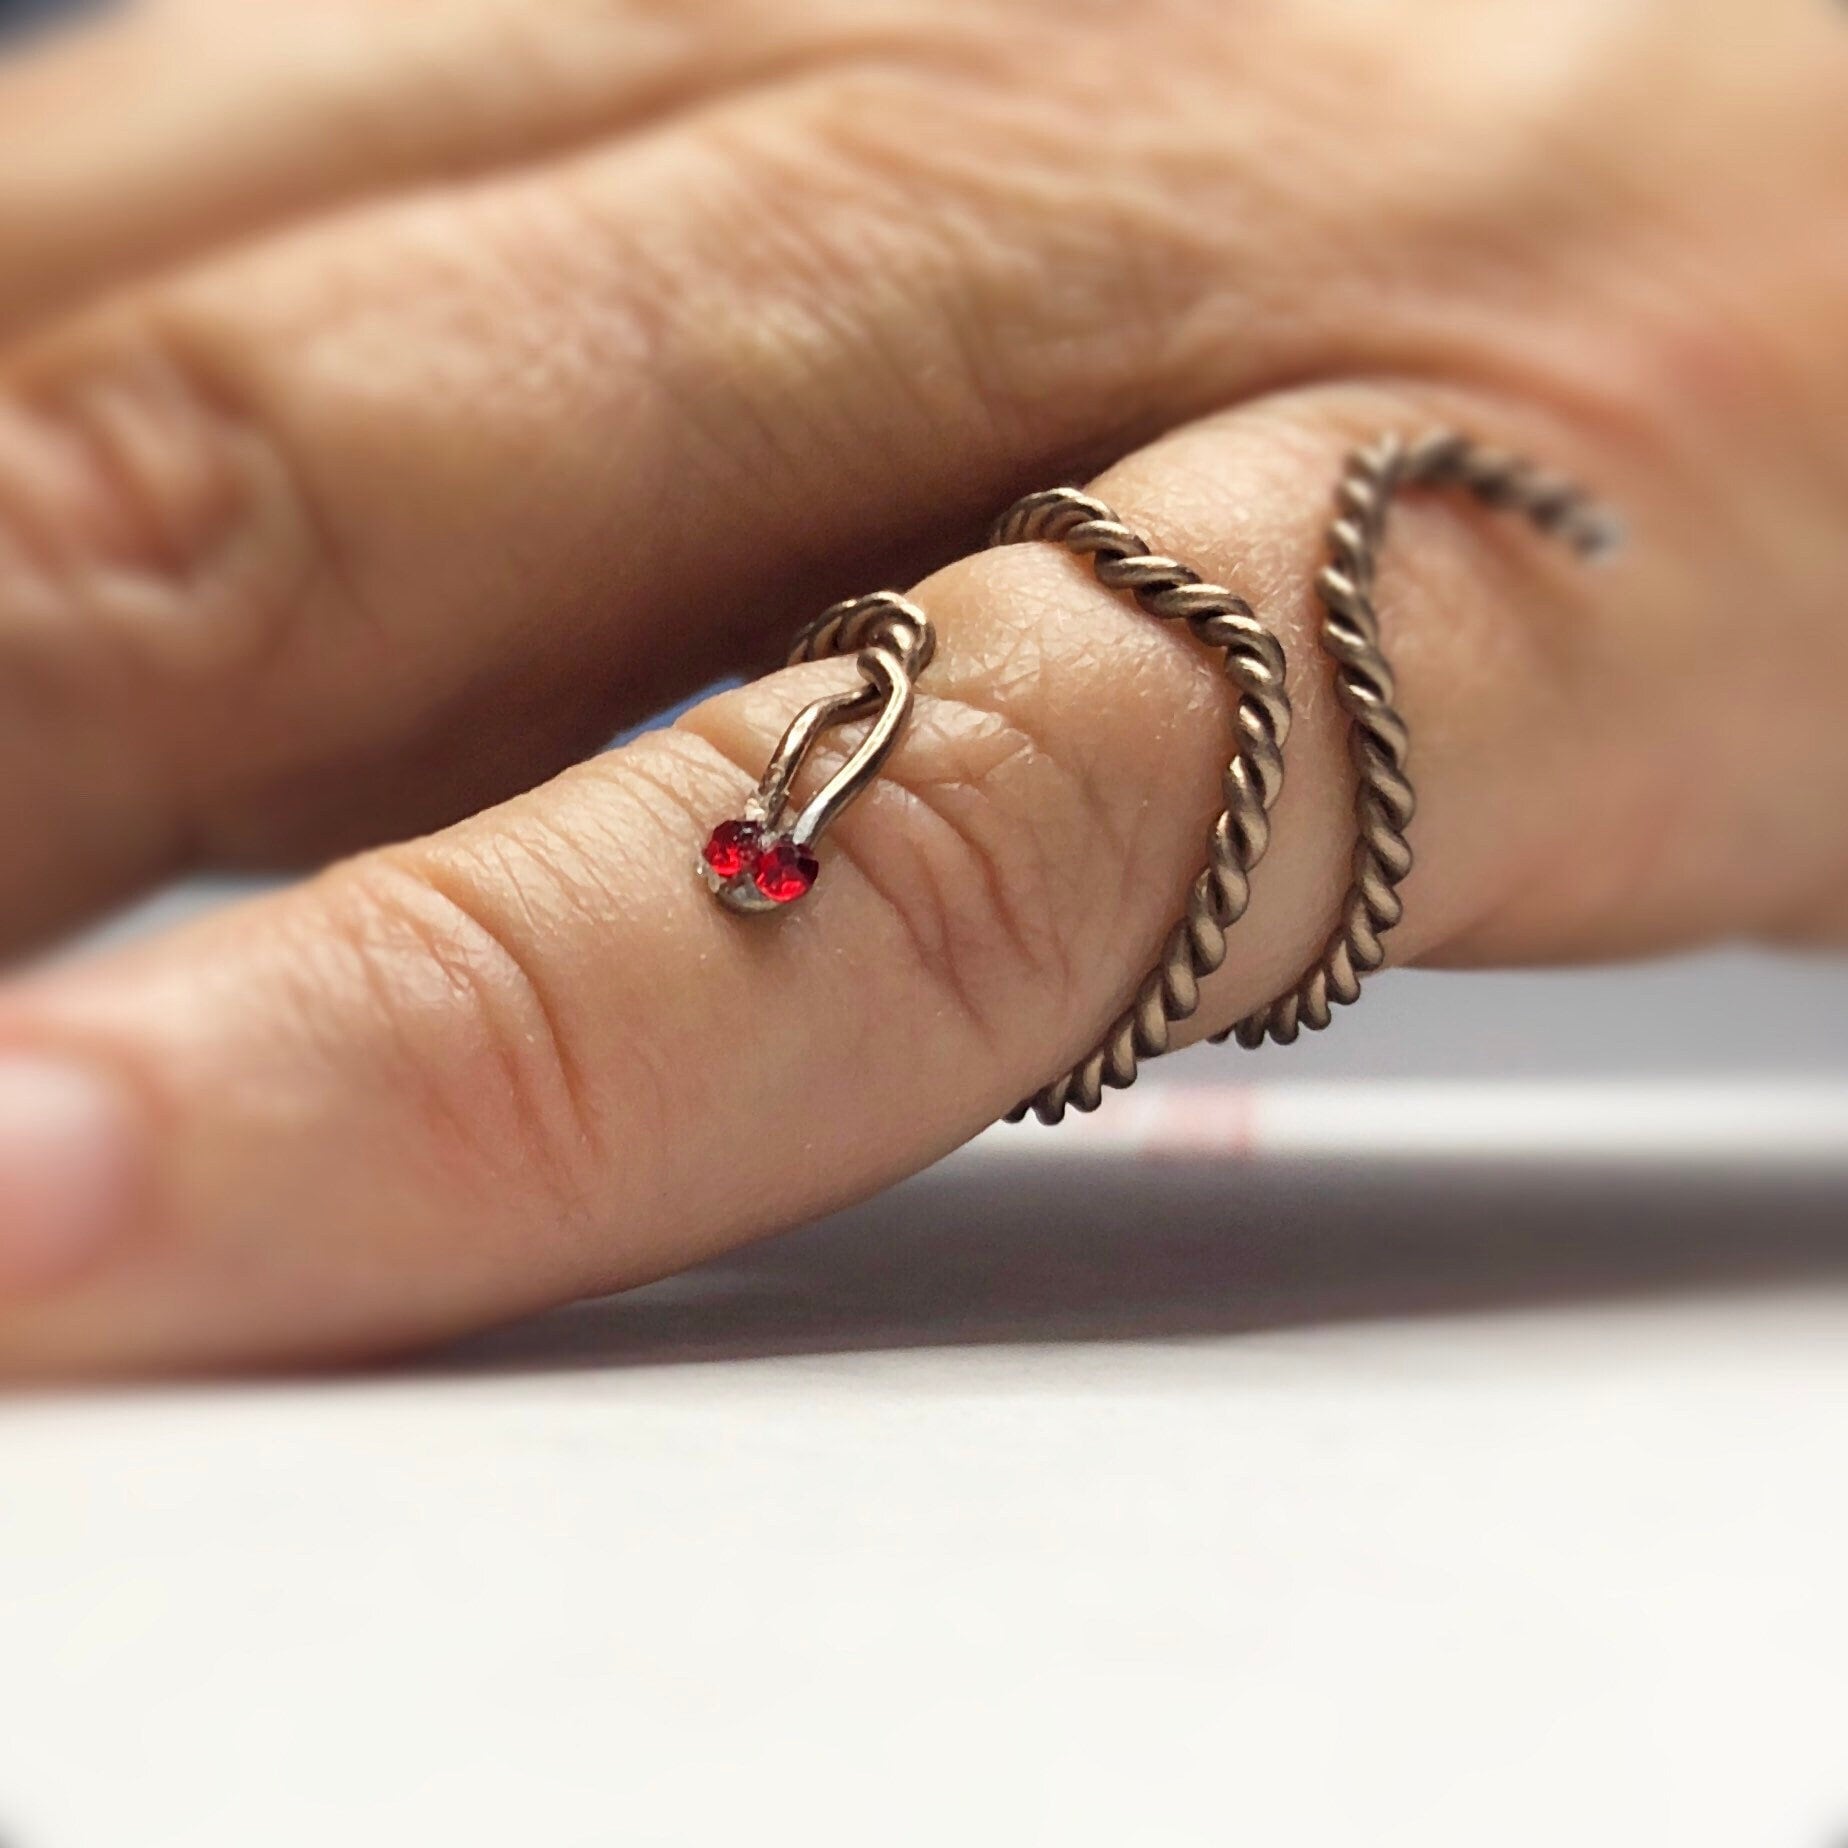 Handmade ruby gothic ring snake ring women, Wicked adjustable reptile ring gold, Sparkly evil eye serpent ring, Red snake eyes snake gifts,